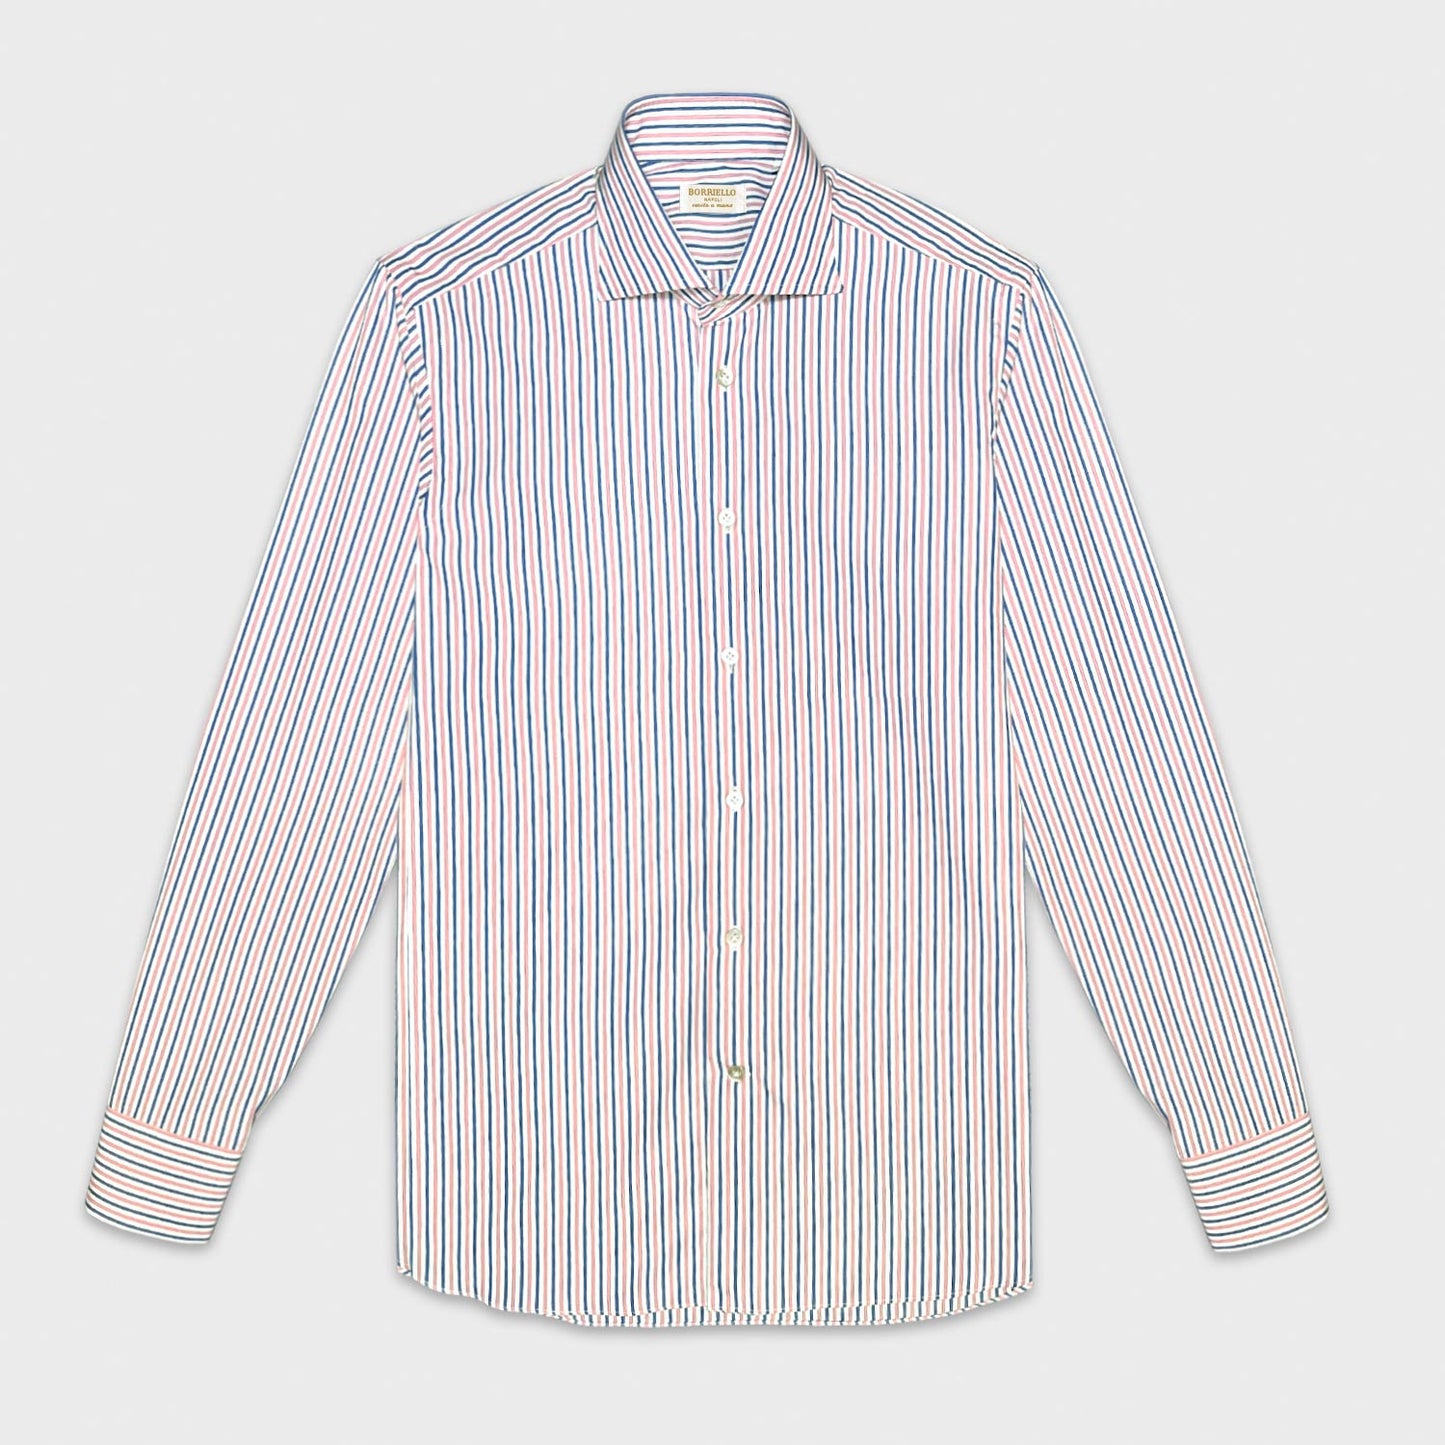 Pink and denim blue classic coloured striped shirt made with Thomas Mason fabric yarn-dyed in popeline cotton. Handmade shirt by Borriello Napoli exclusive for Wools Boutique Uomo, easy to match with many classic ties and jackets